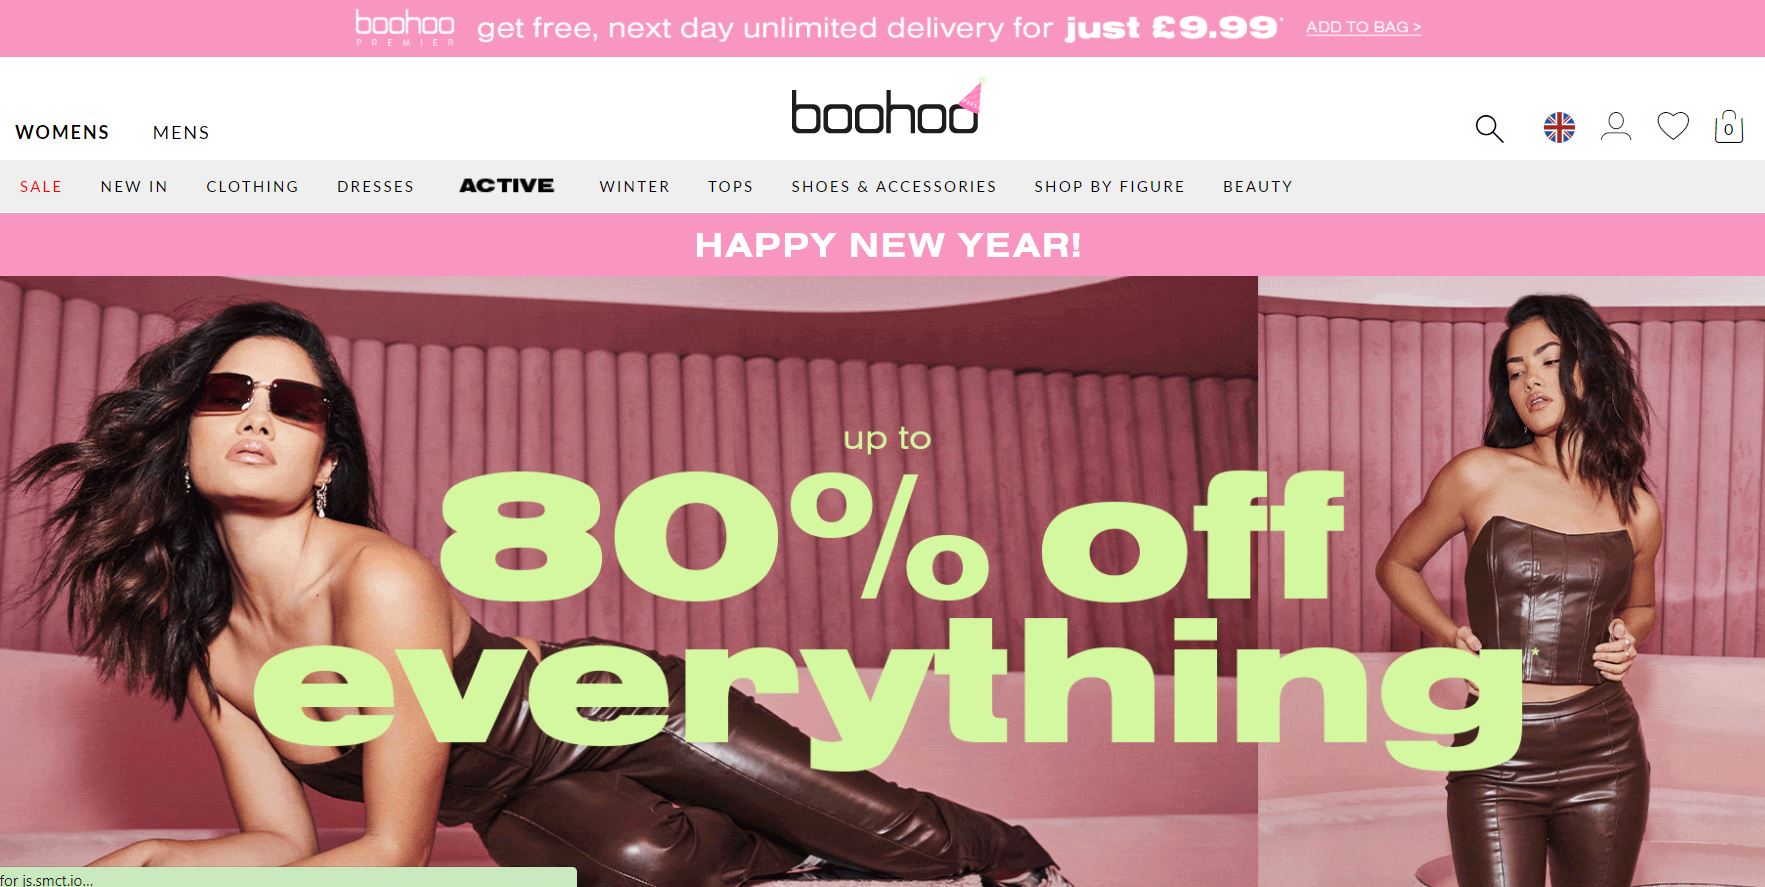 Boohoo Com: Worth, Suppliers, Competitors And Its Share Price 